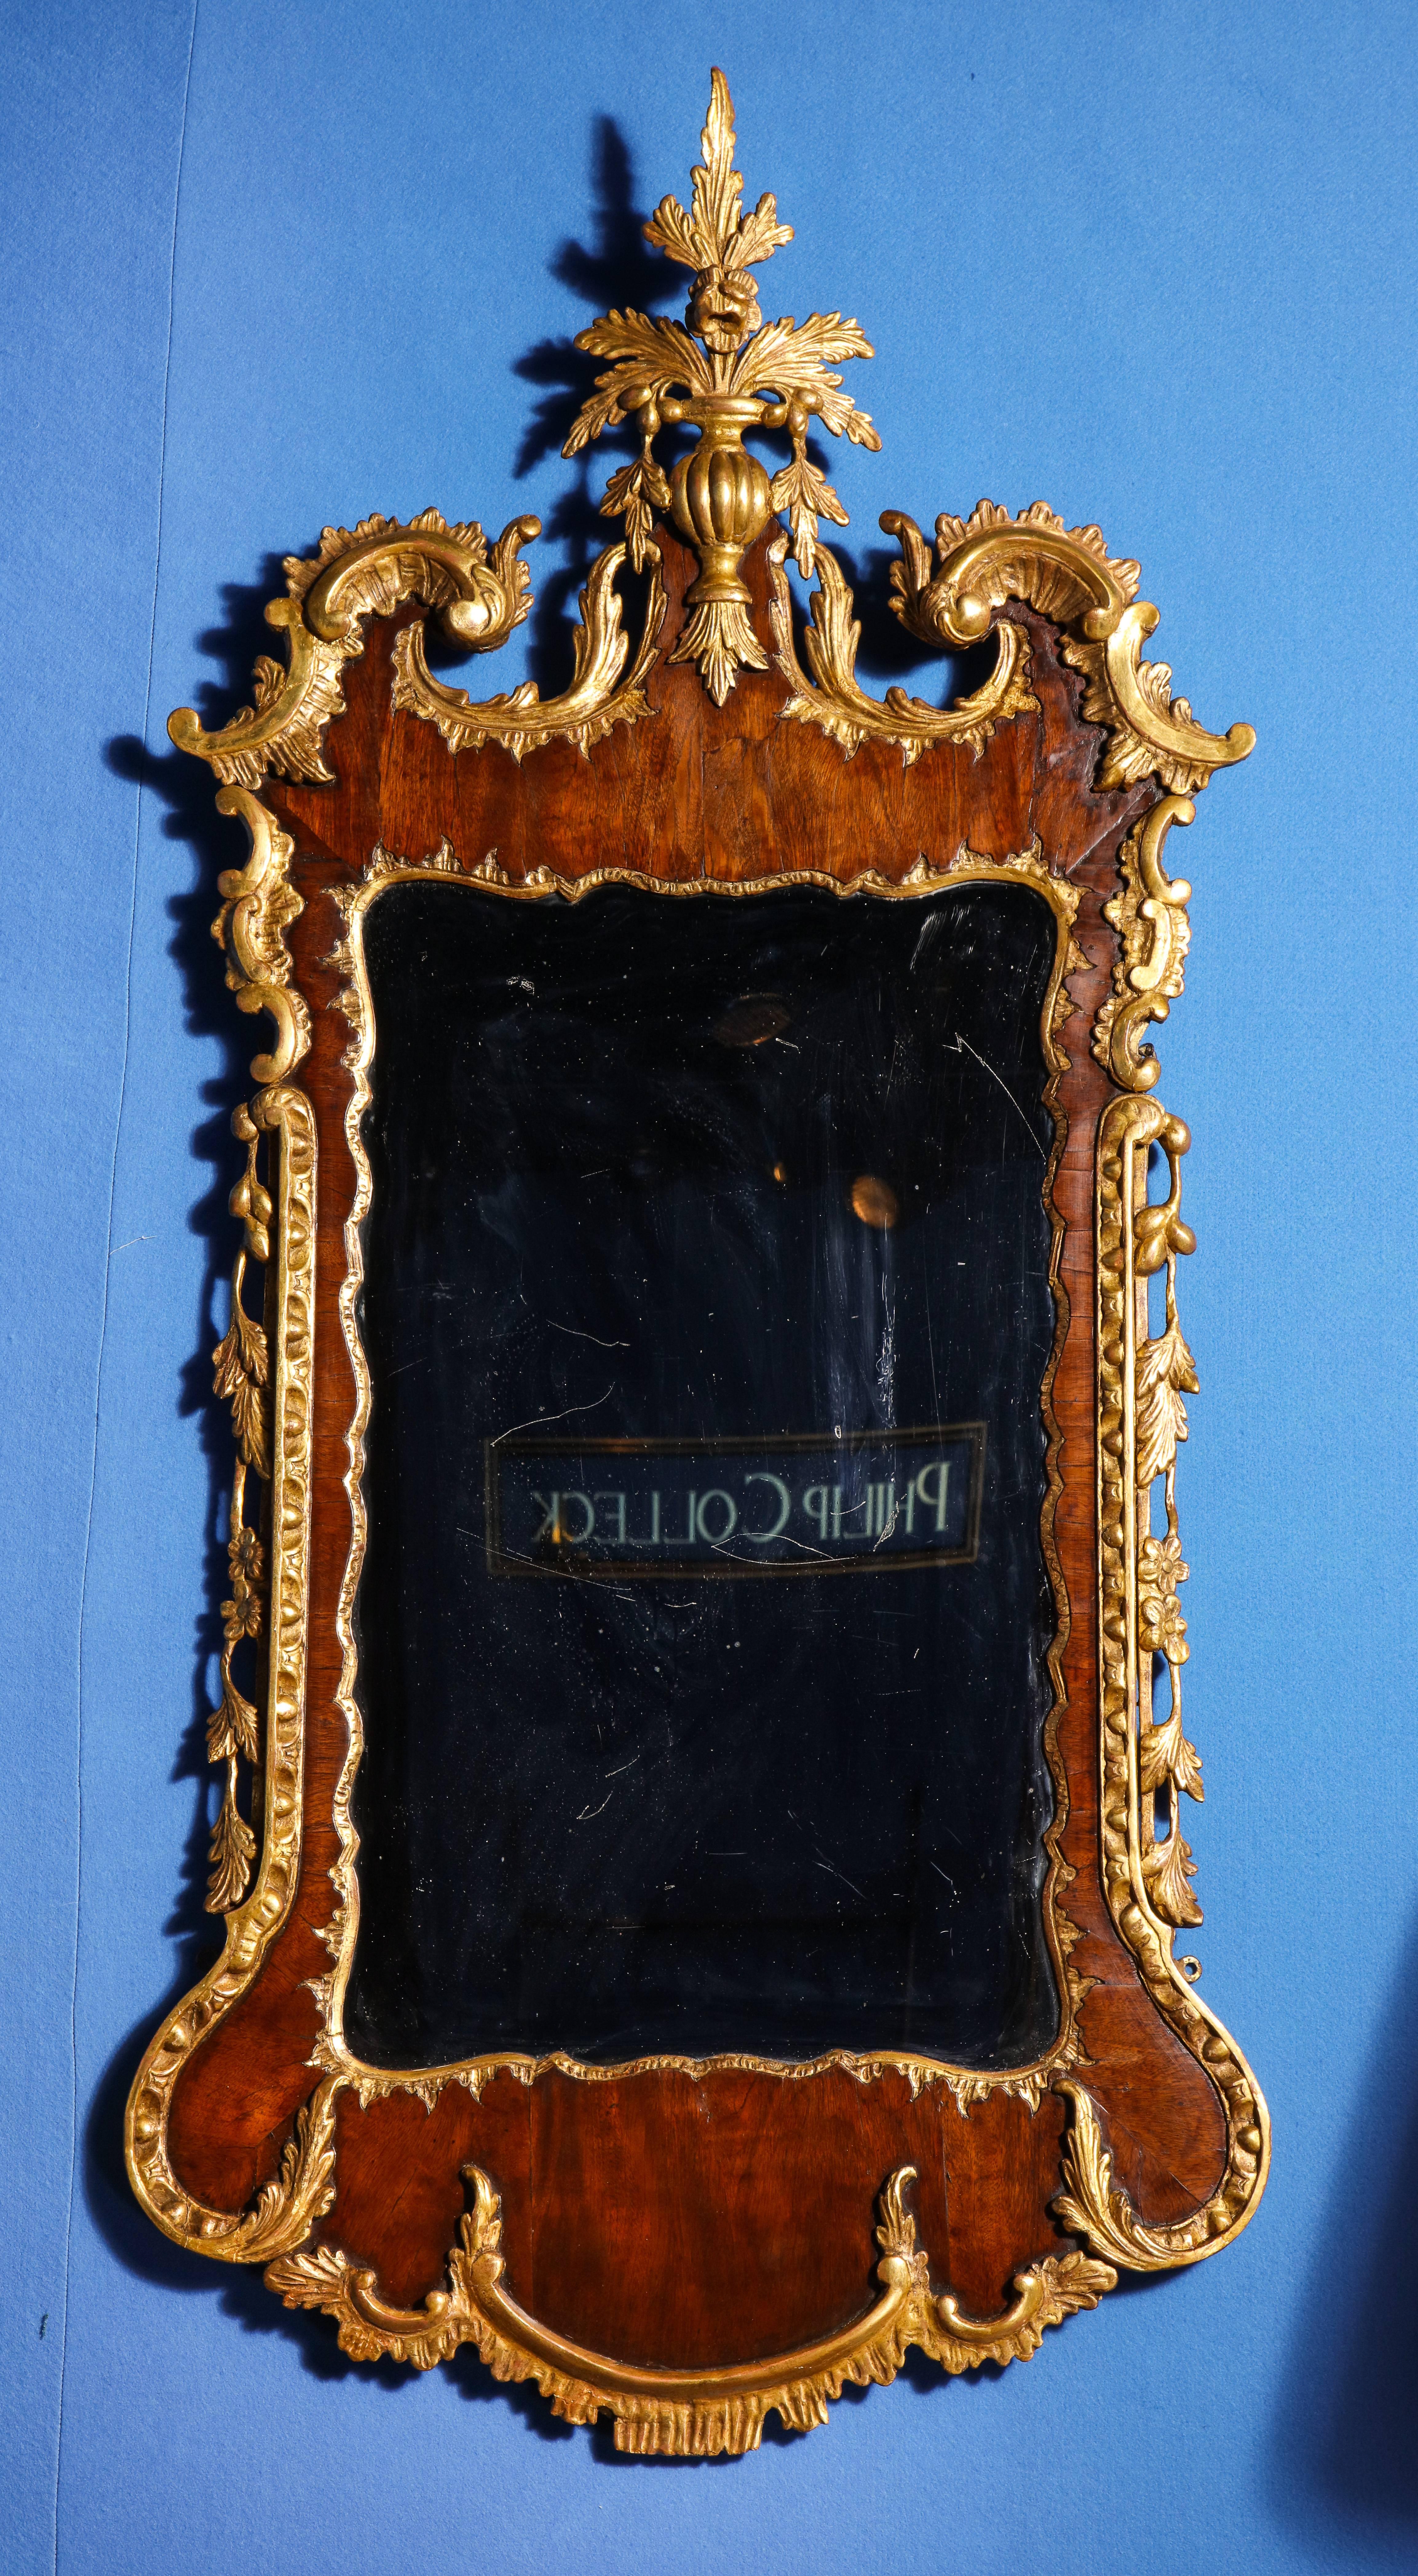 A superb antique George II parcel-gilt mahogany mirror, having a wonderful leaf and rosette central cartouche above a swan's neck pediment with 